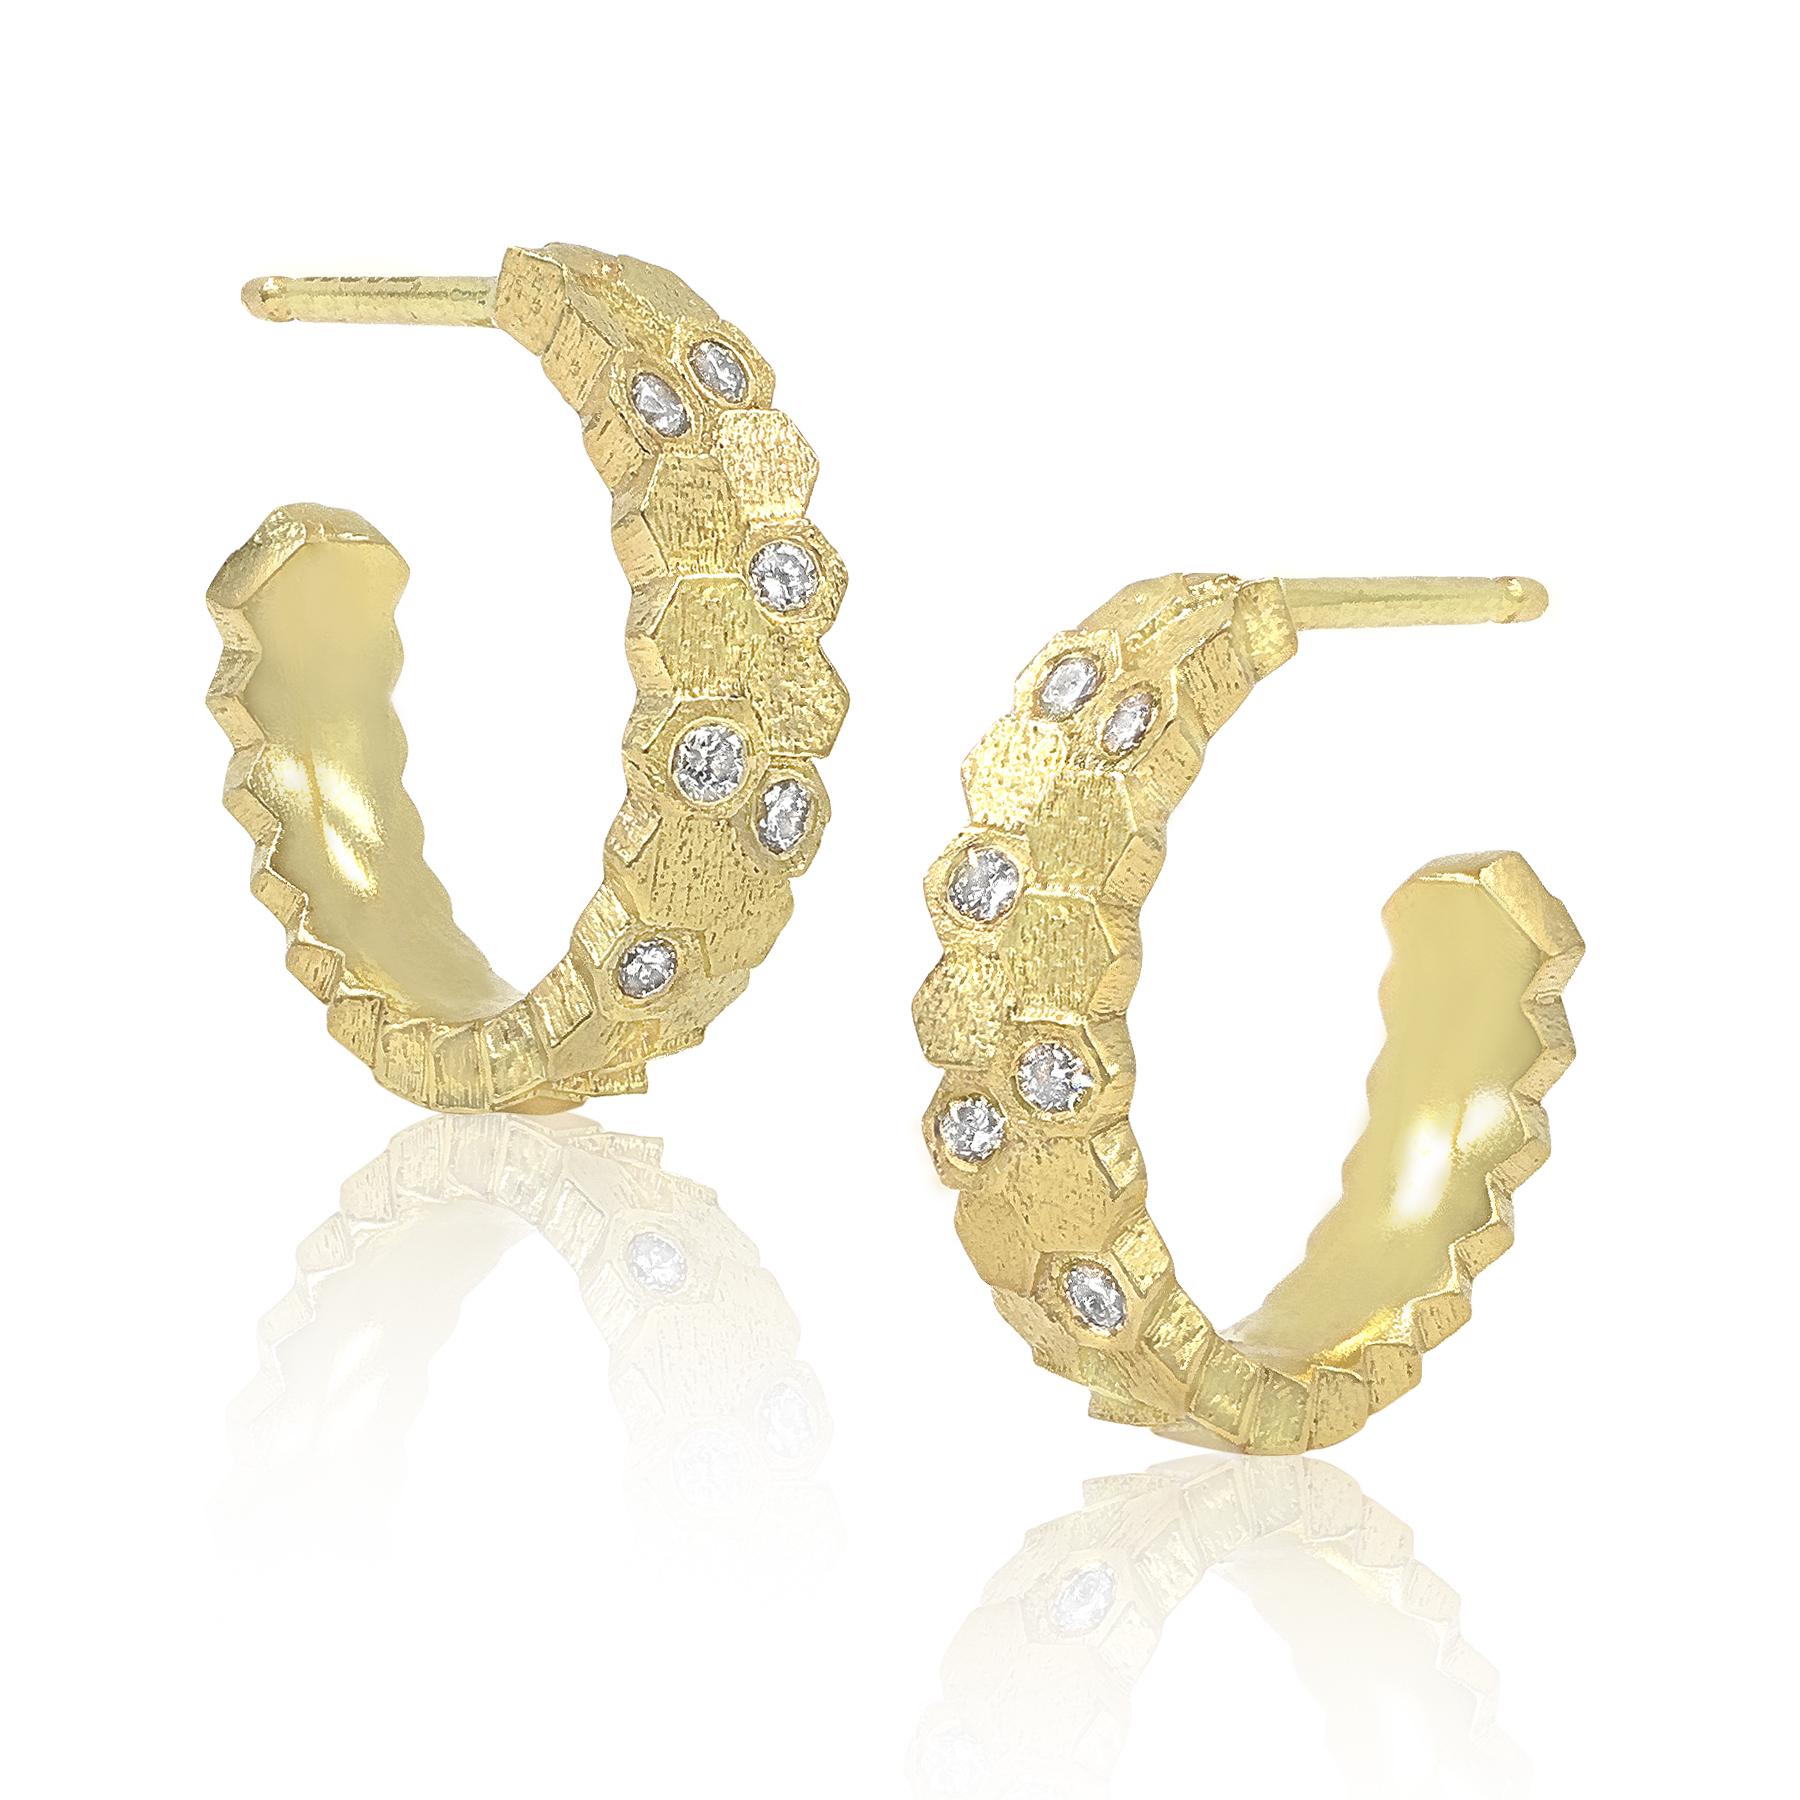 Double Hex Hoop Earrings (14mm) handcrafted in London by jewelry designer Jo Hayes Ward in her signature-finished reflective 18k yellow gold featuring 12 round, brilliant-cut white diamonds (0.07 tcw). 